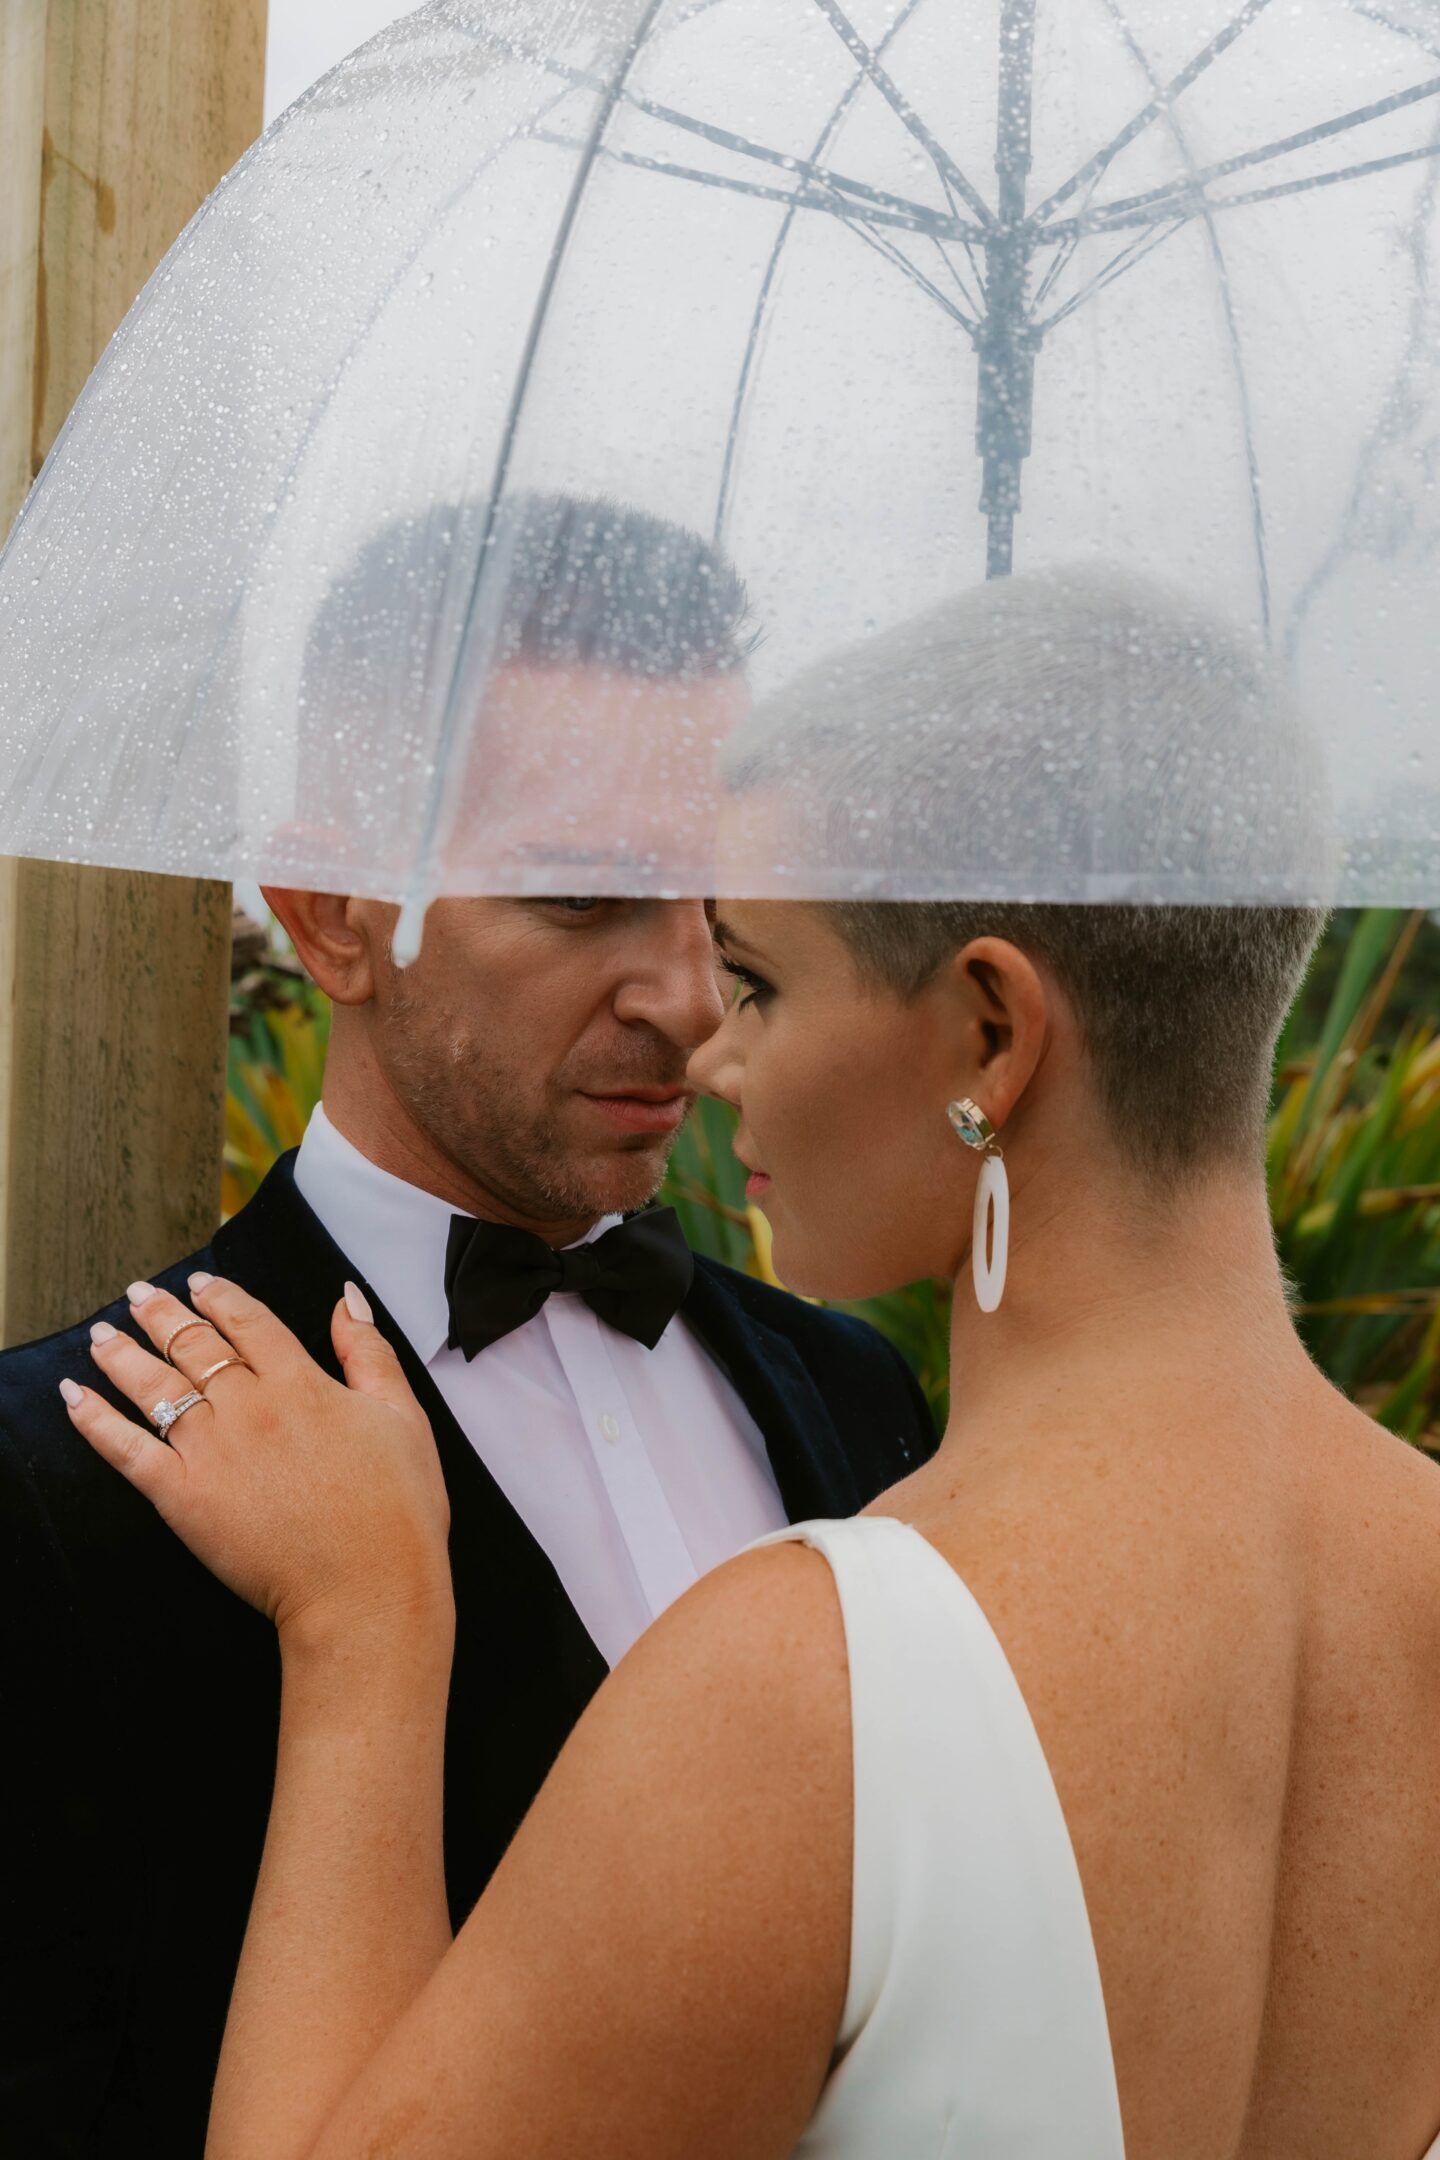 How To Cover All Weather Conditions On Your Wedding Day 